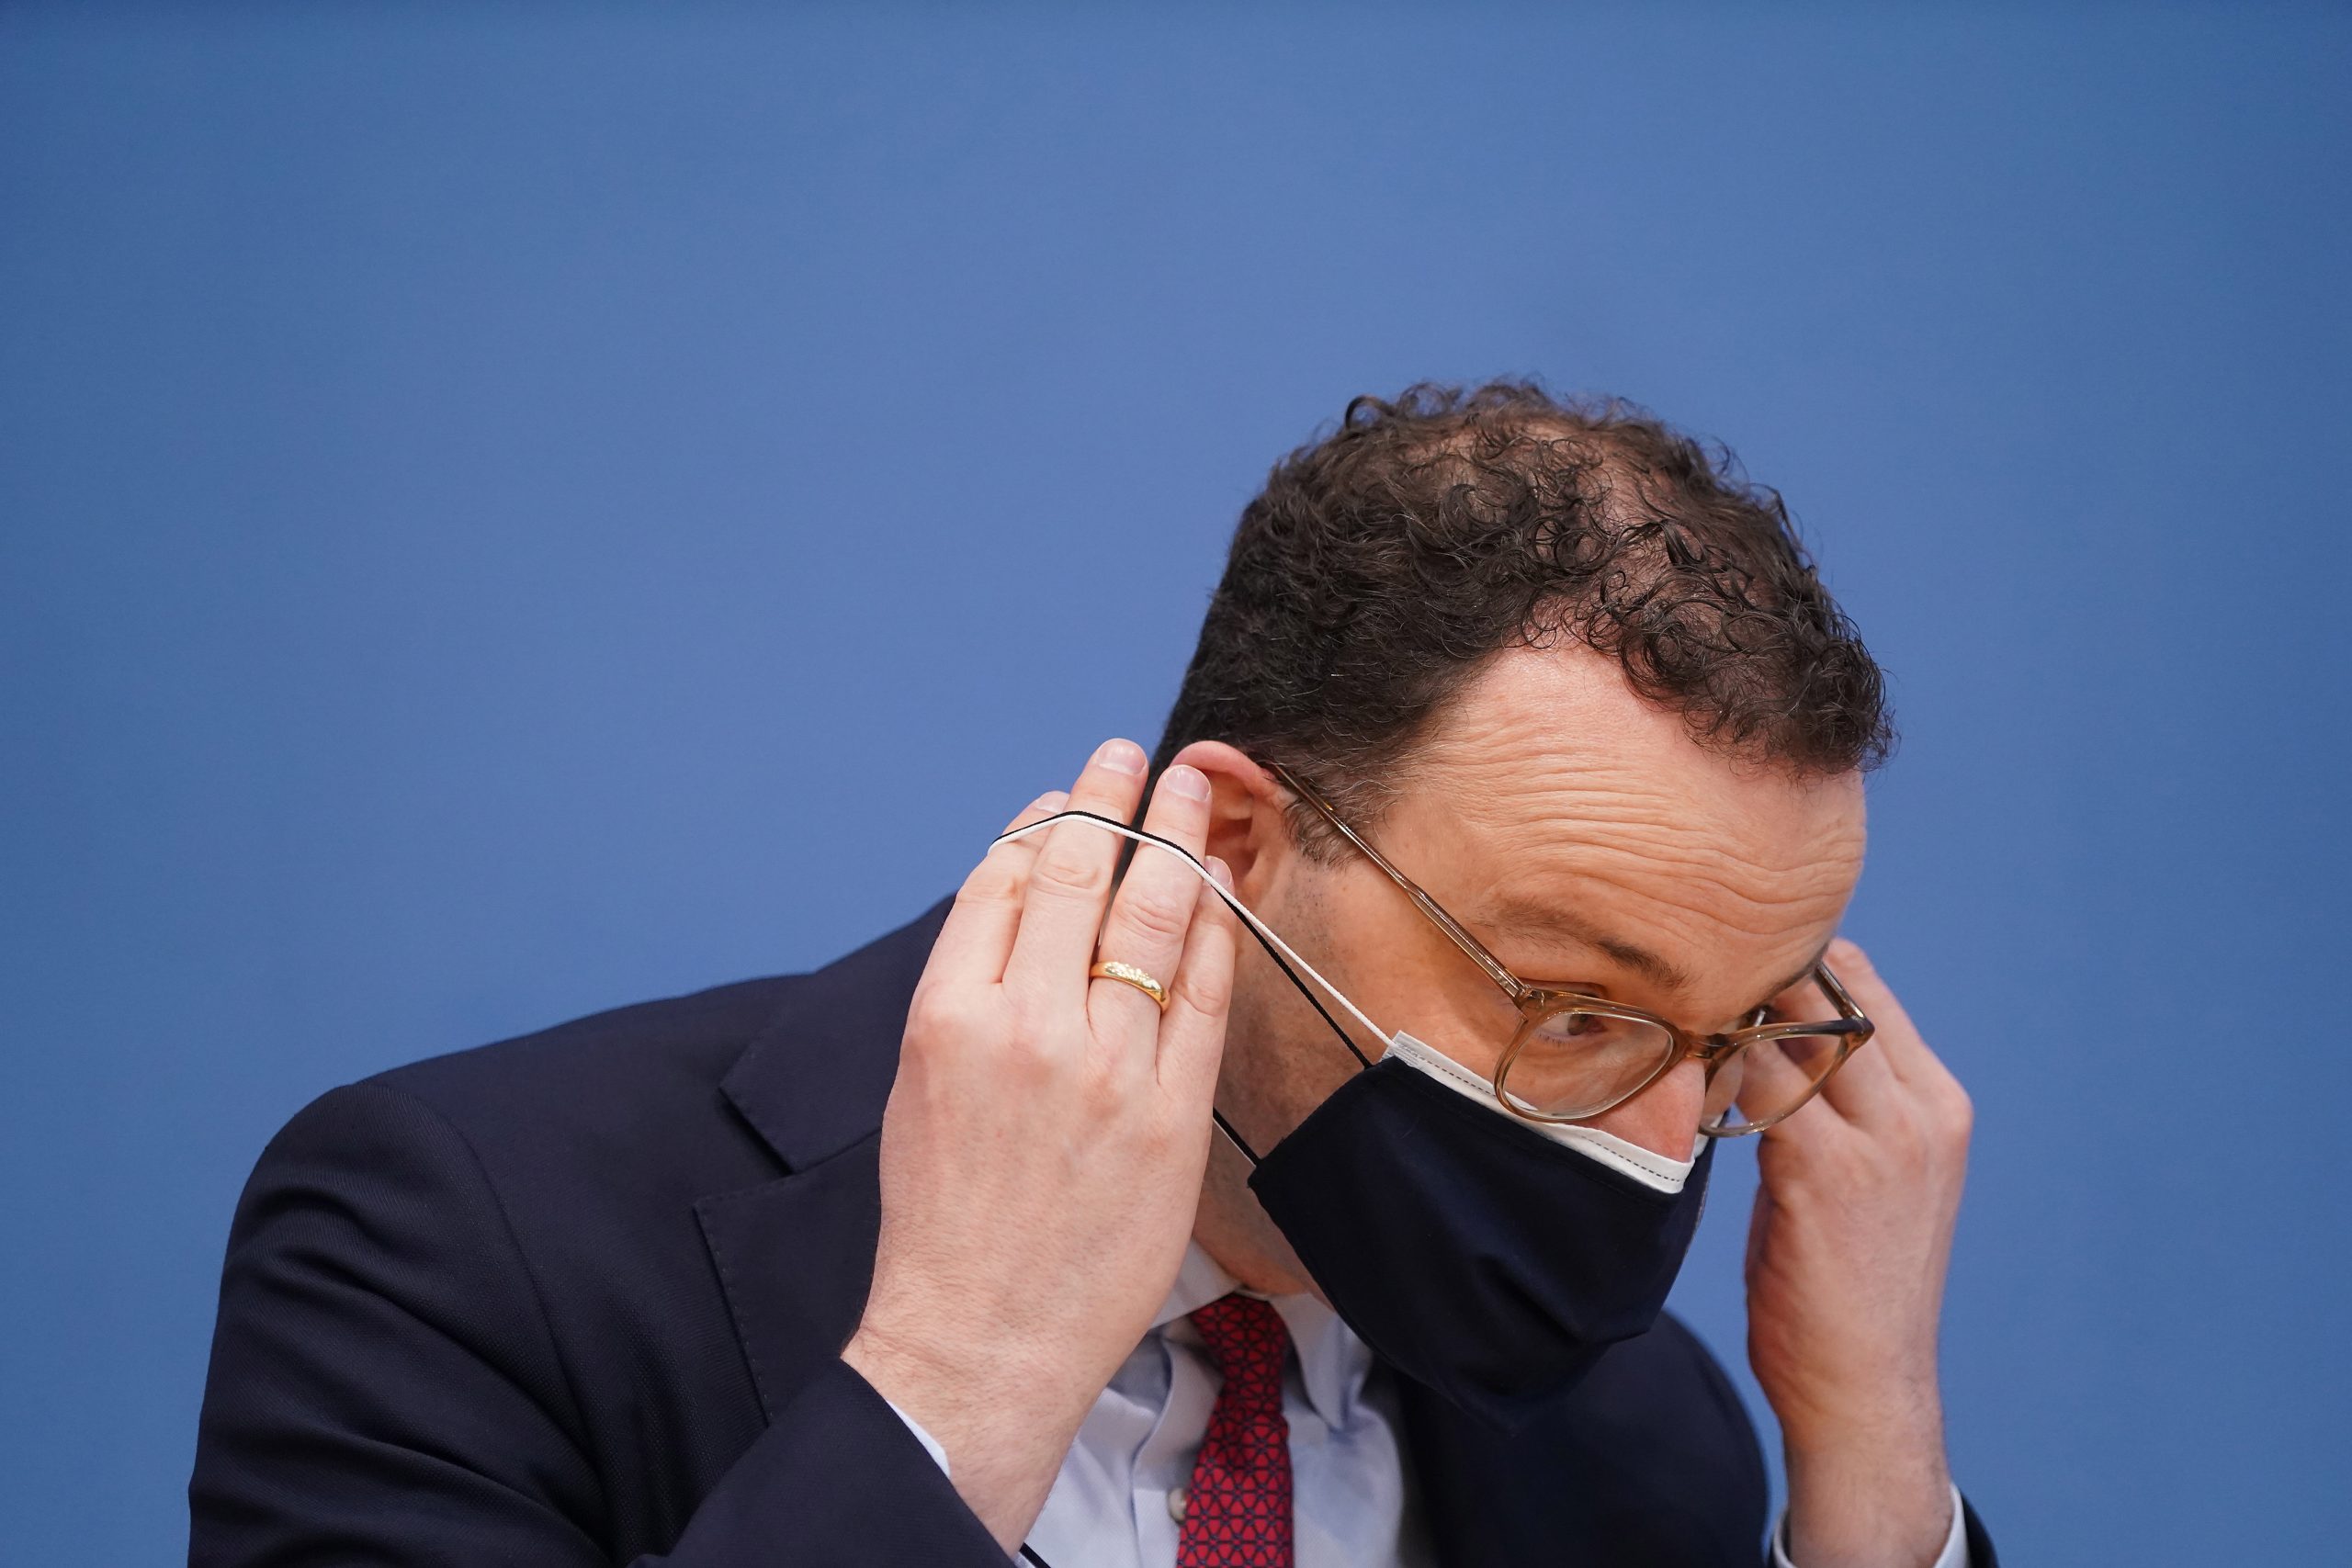 epa09110089 German Health Minister Jens Spahn removes his mask as he arrives to speak to the media to outline the large-scale rollout of inoculations against Covid-19 at private medical practices during the third wave of the coronavirus pandemic in Berlin, Germany, 01 April 2021. The rollout is to begin next week nationwide and will come as a further means for increasing the pace of vaccinations.  EPA/Sean Gallup / POOL